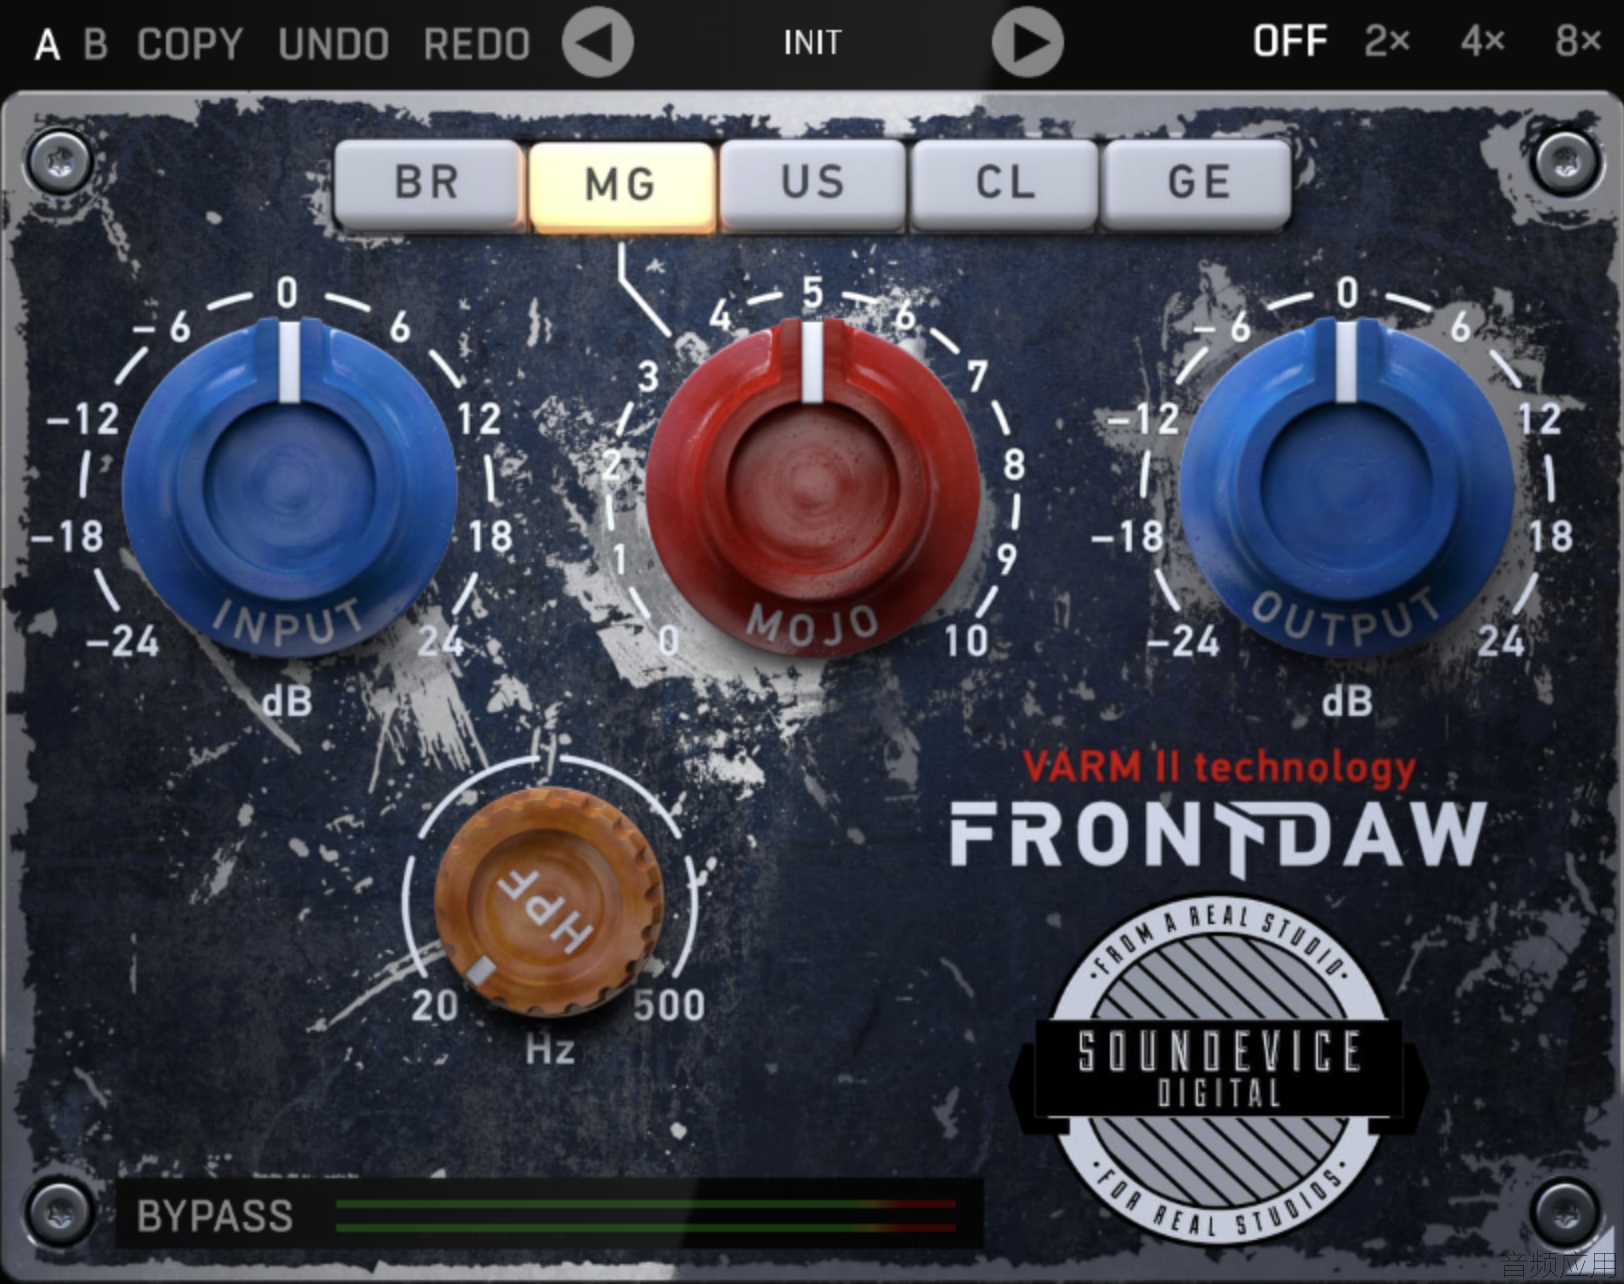 1109158d1711387873-united-plugins-announces-frontdaw-3-a-unnamed.png